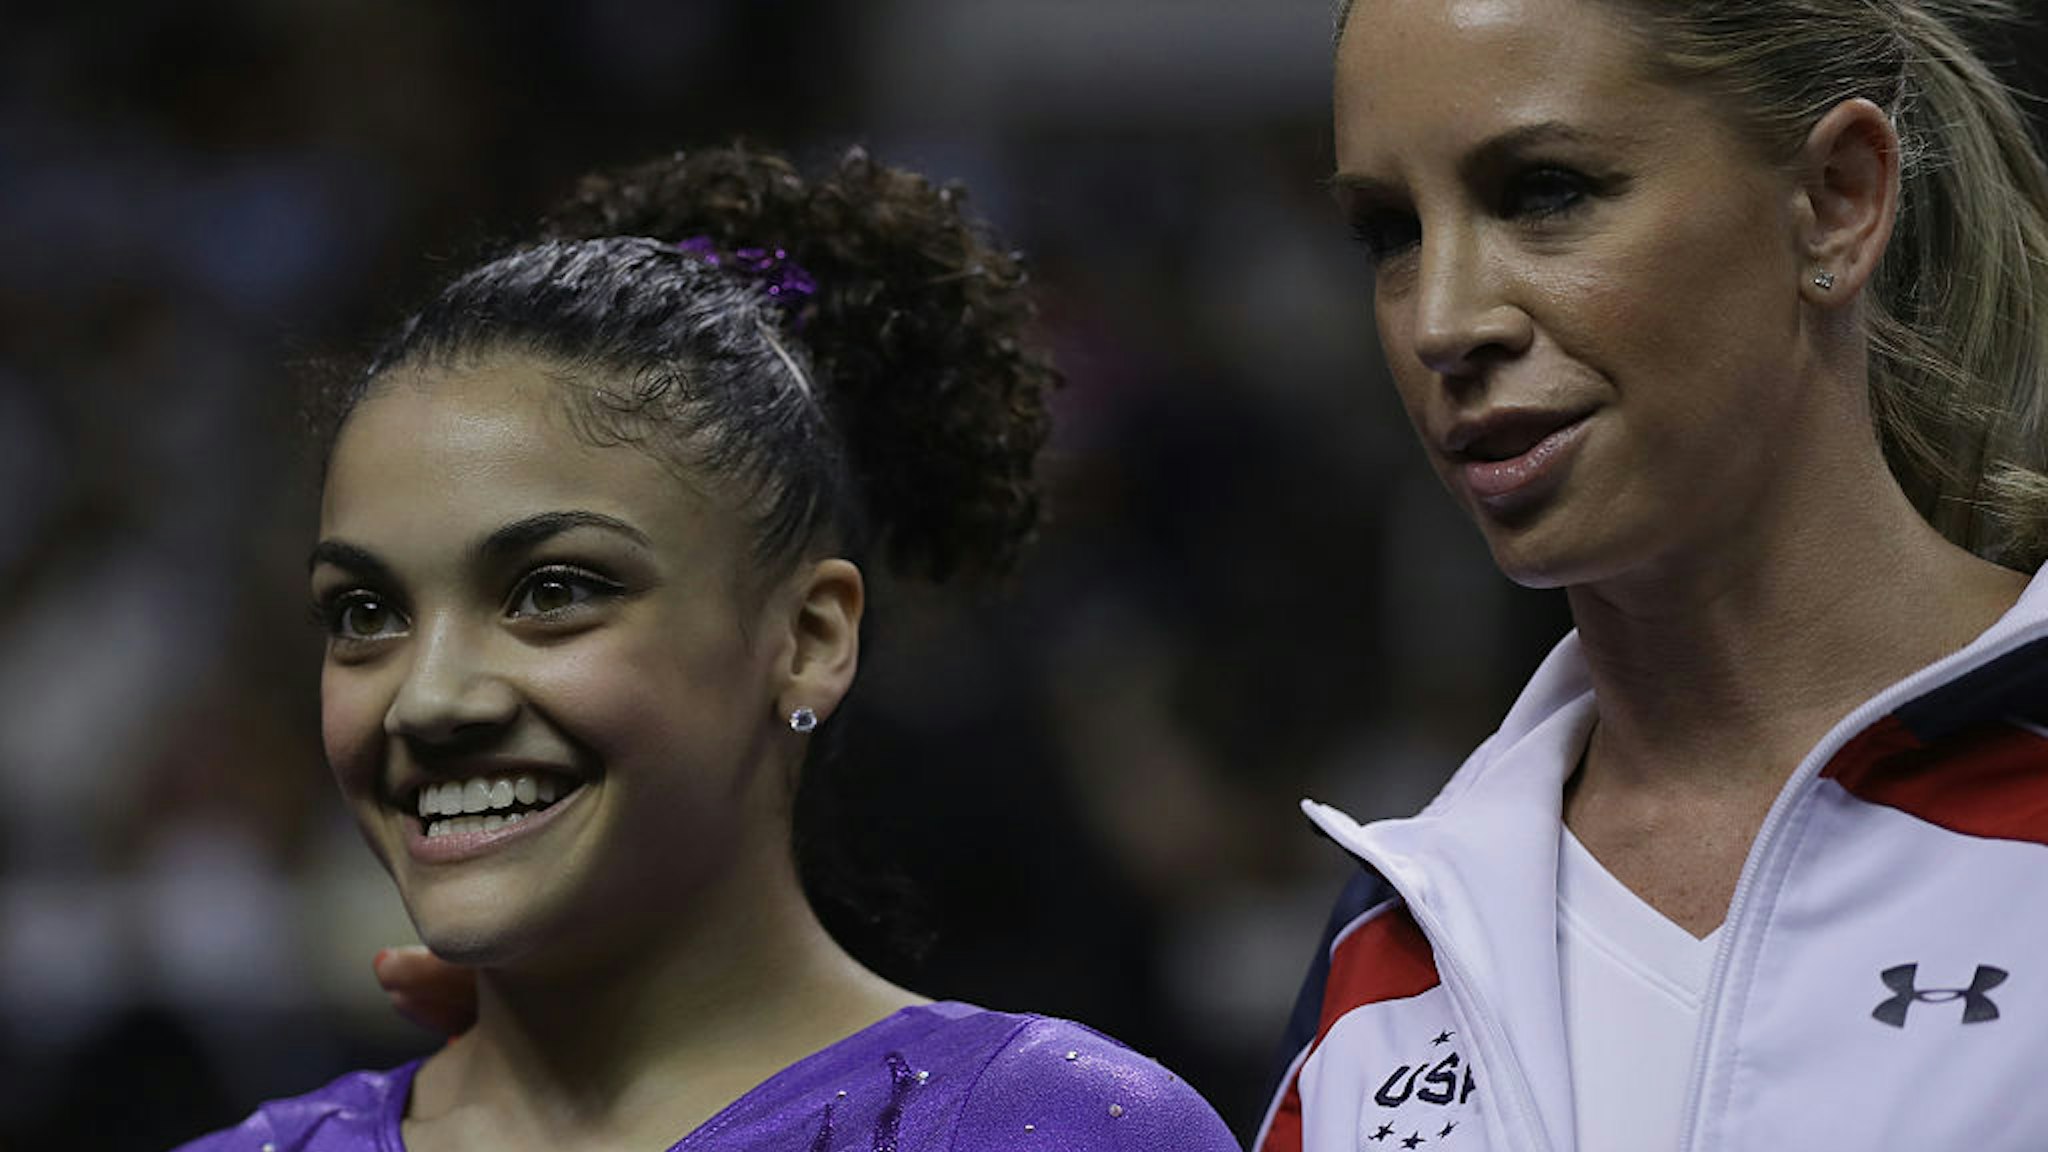 Lauren Hernandez with Maggie Haney after competing on the balance beam during day 1 of the 2016 U.S. Olympic Women's Gymnastics Team Trials at SAP Center on July 8, 2016 in San Jose, California.